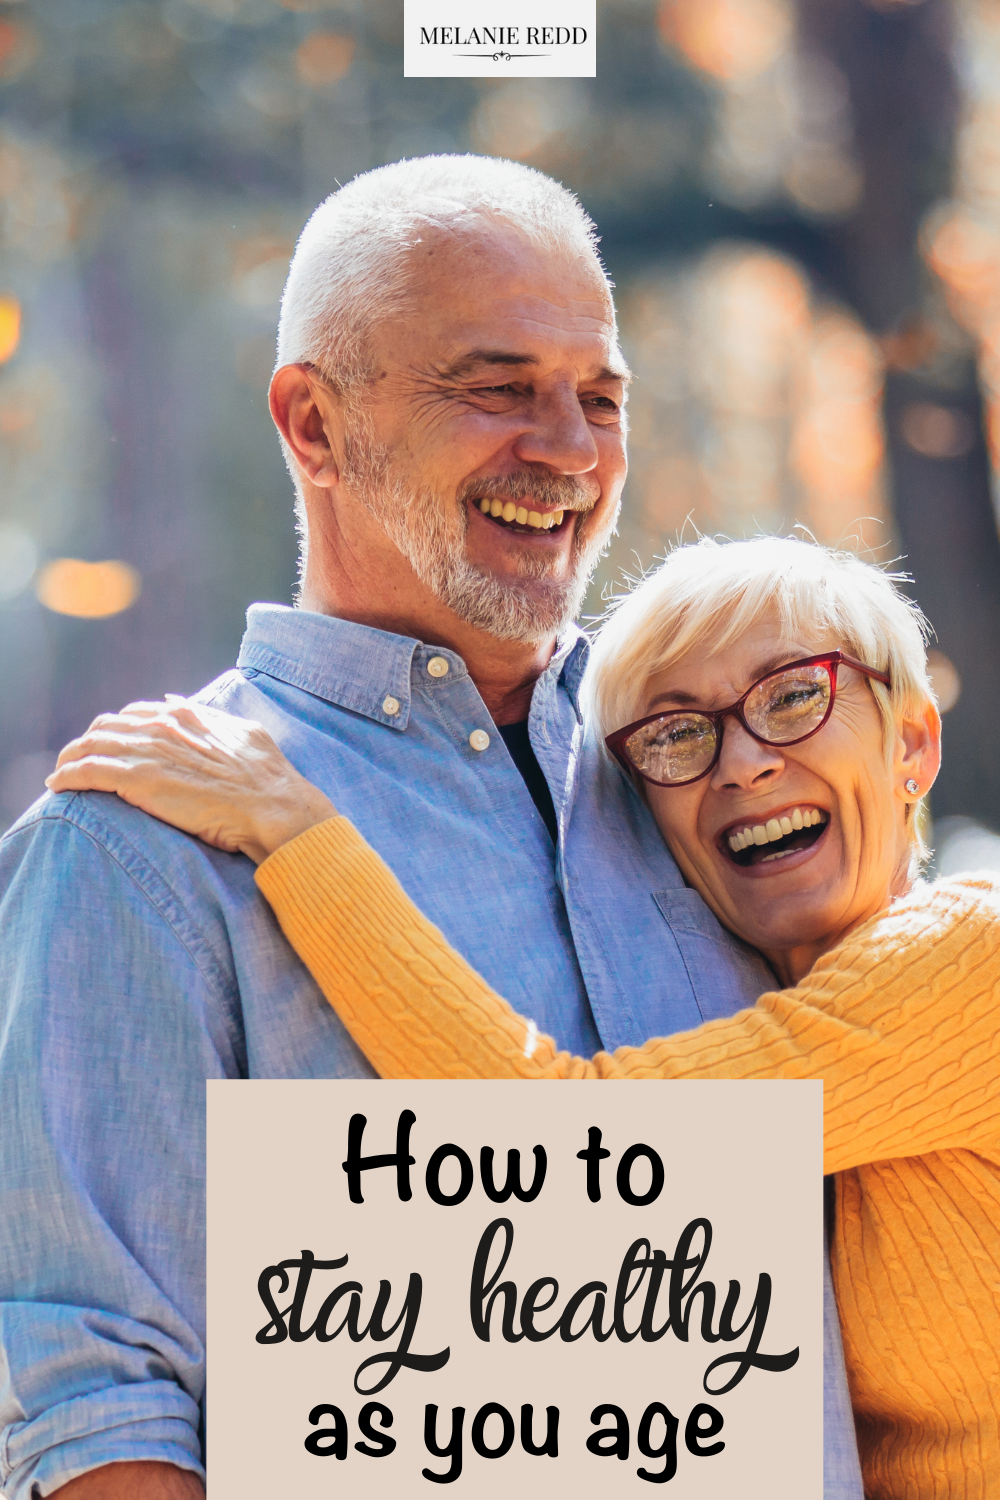 Are you getting older? Feeling older? Hitting a new season in life? Here are 4 practical suggestions for how to stay healthy as you age.